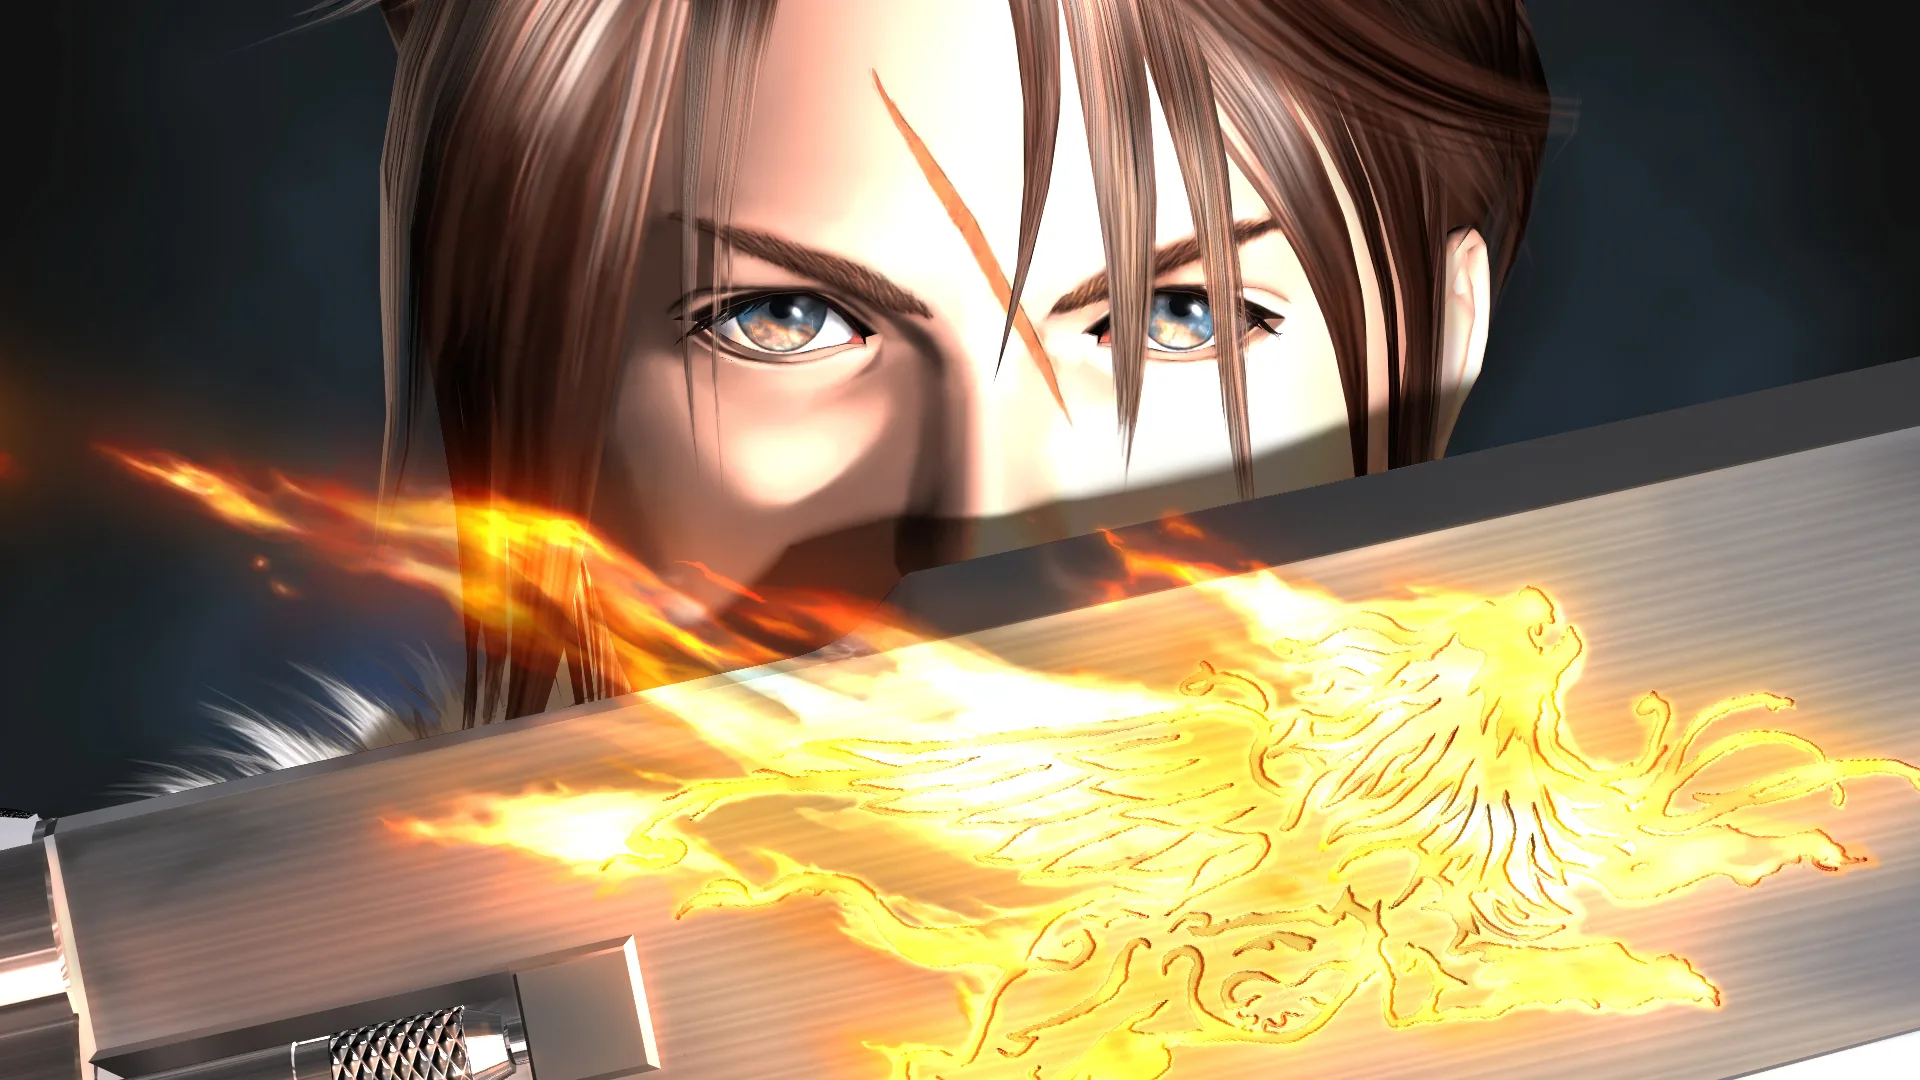 Final Fantasy 8 Key Art With Squall